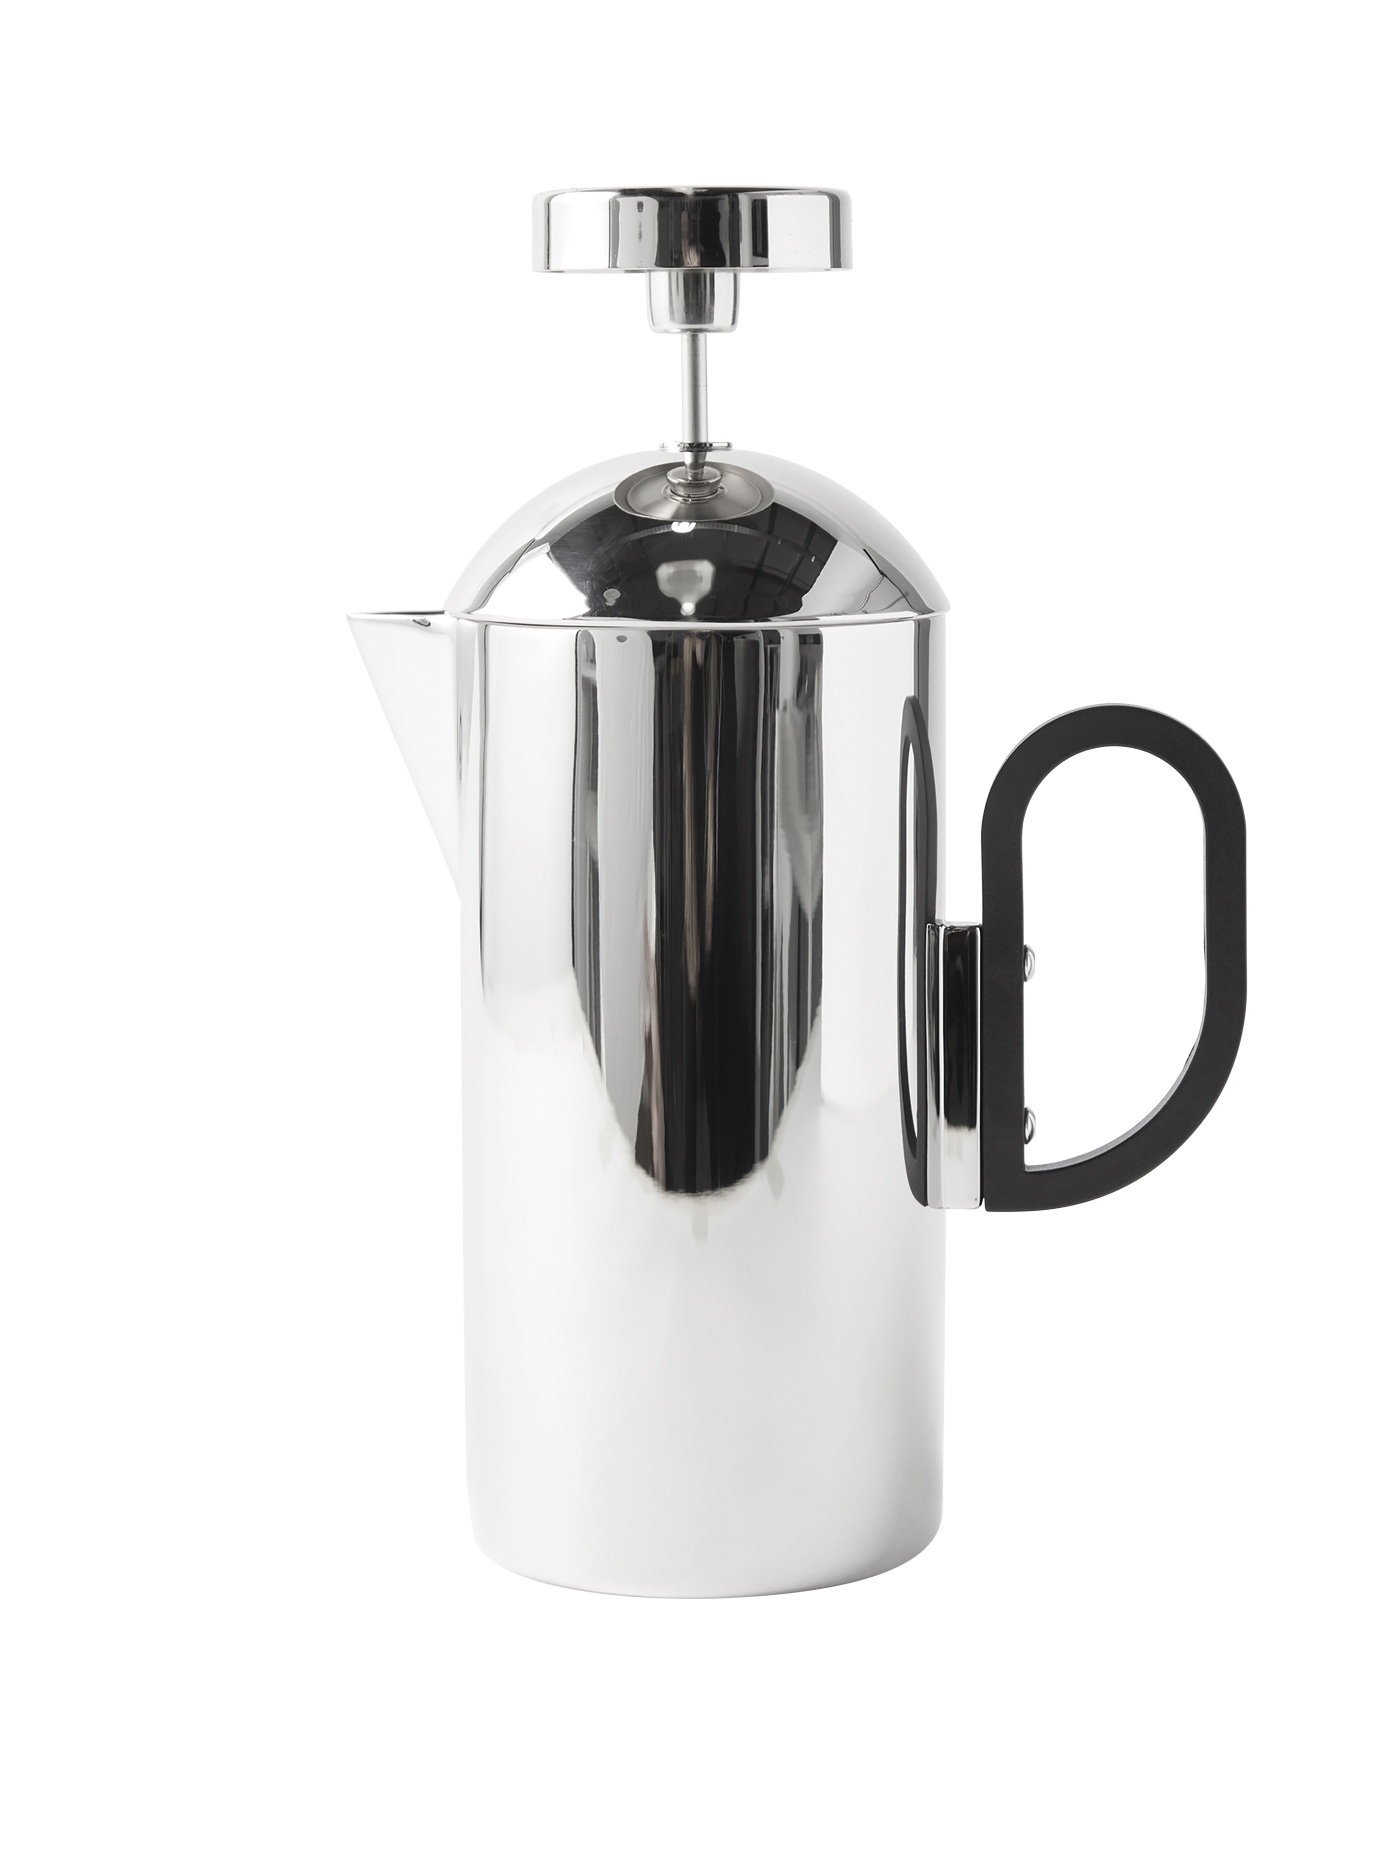 Tom Dixon, Brew Stainless Steel Cafetiere, Matchesfashion.com Us